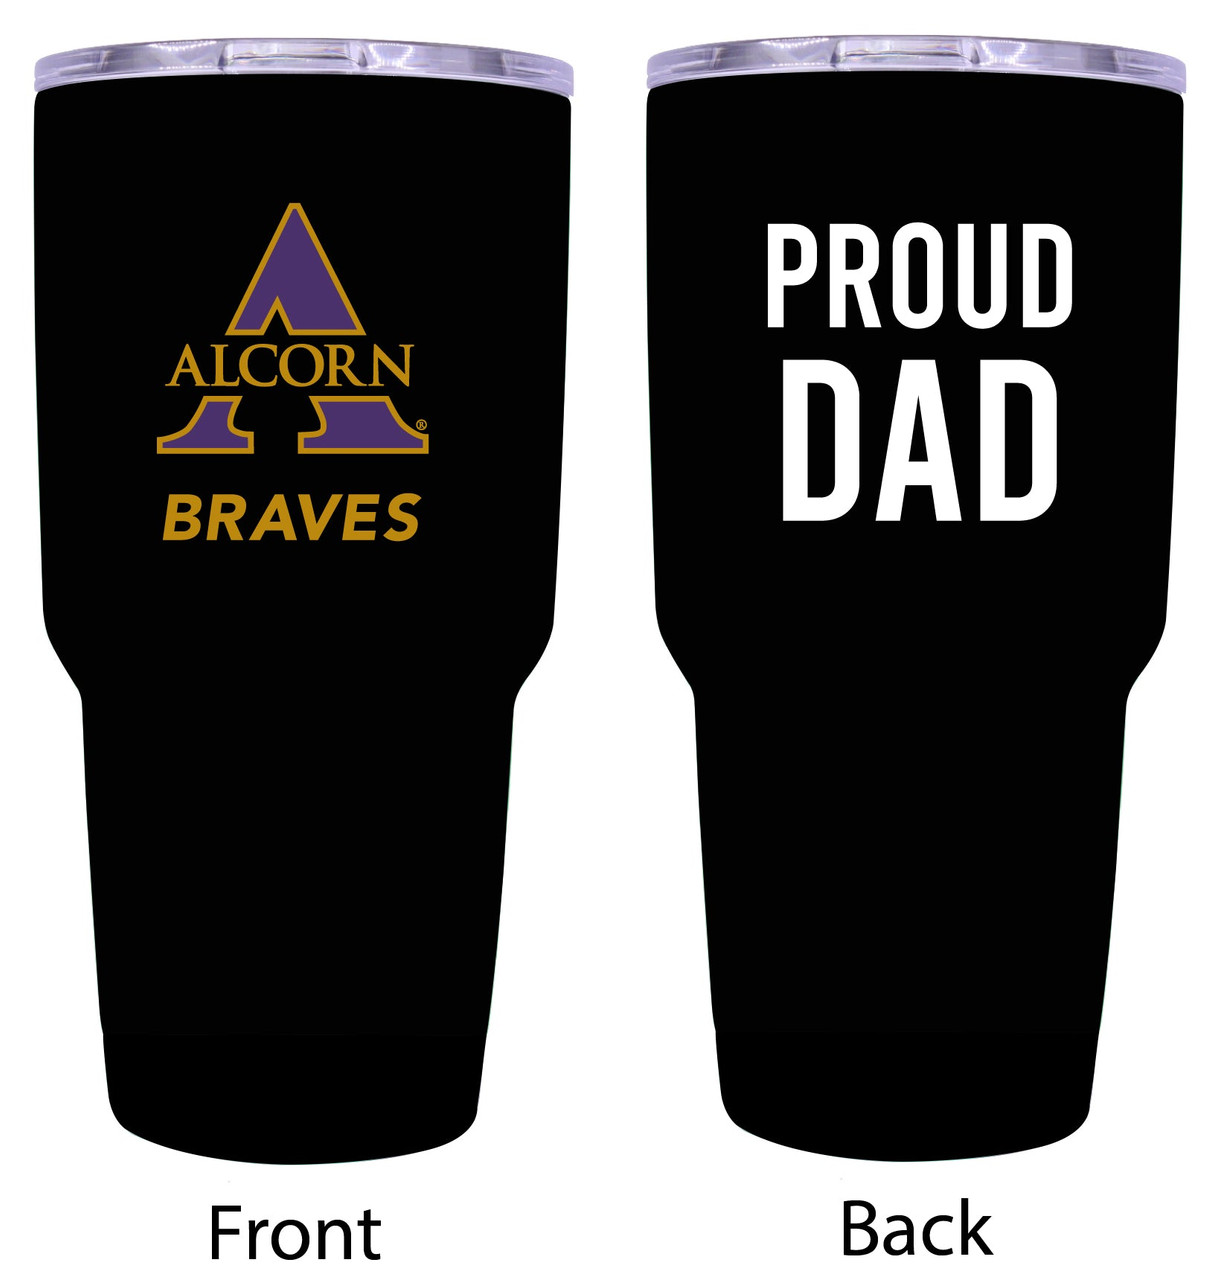 Alcorn State Braves Proud Dad 24 oz Insulated Stainless Steel Tumblers Choose Your Color.